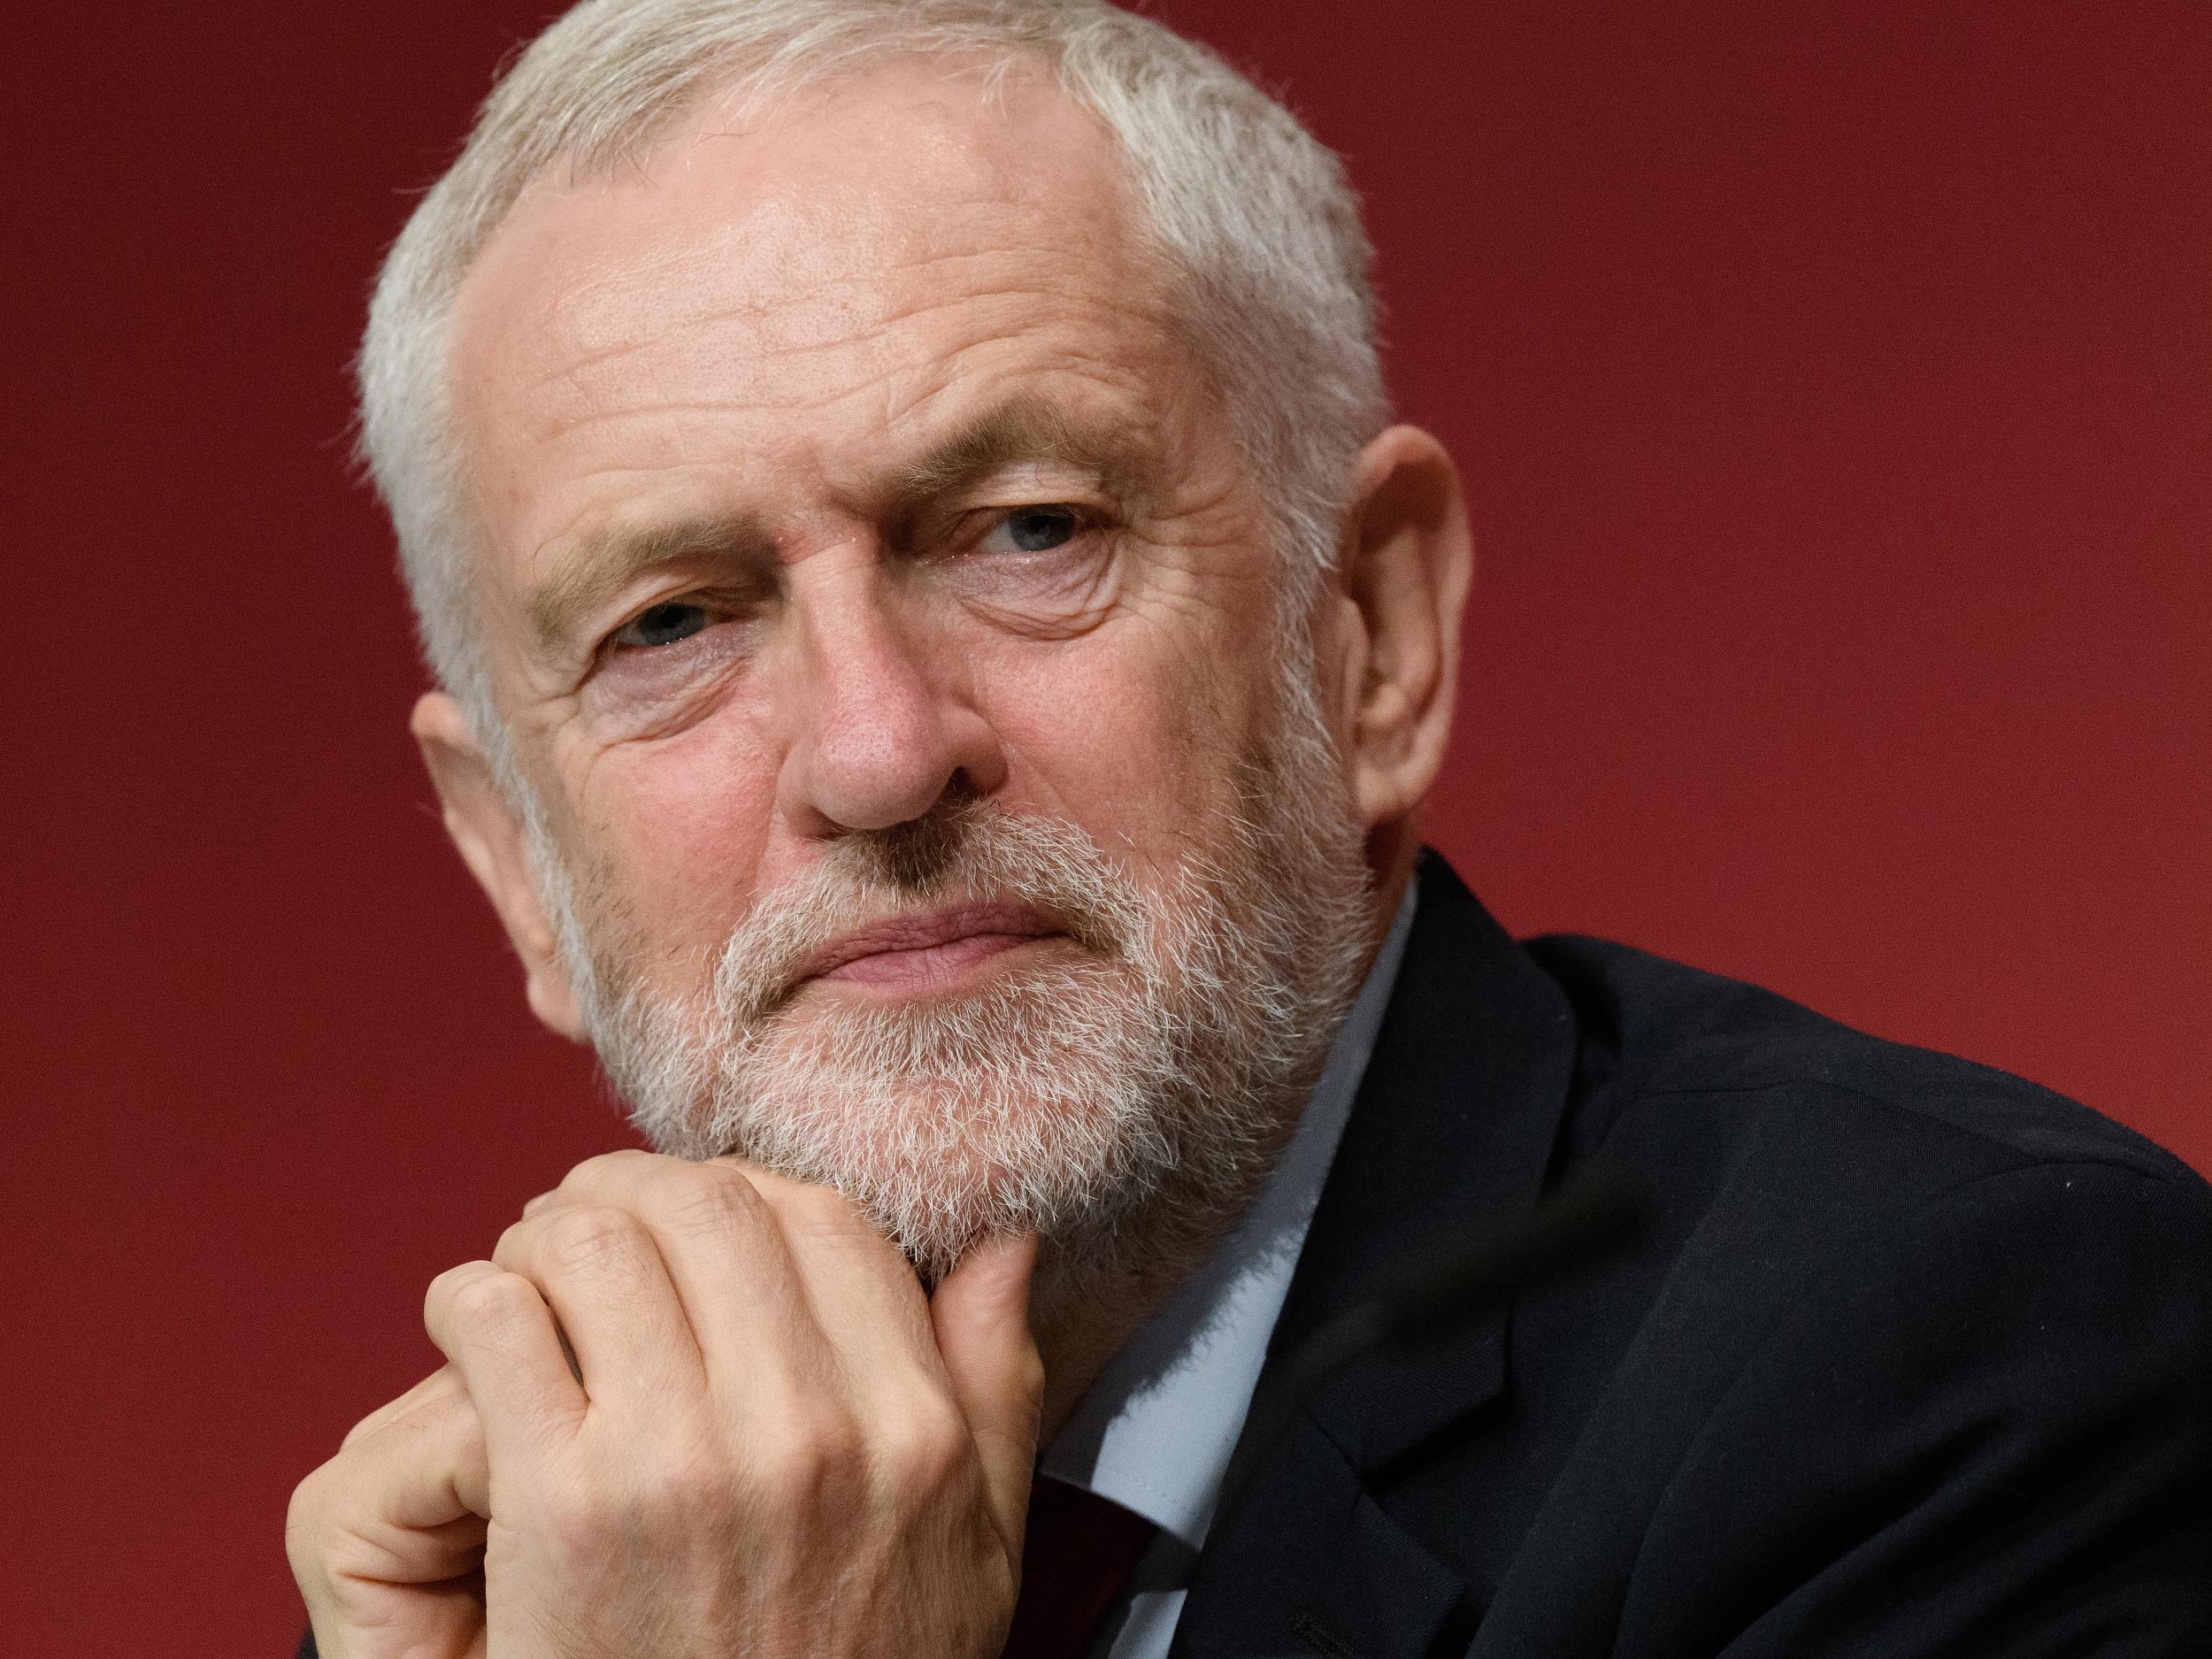 Jeremy Corbyn will condemn a 'culture that has tolerated abuse for far too long'